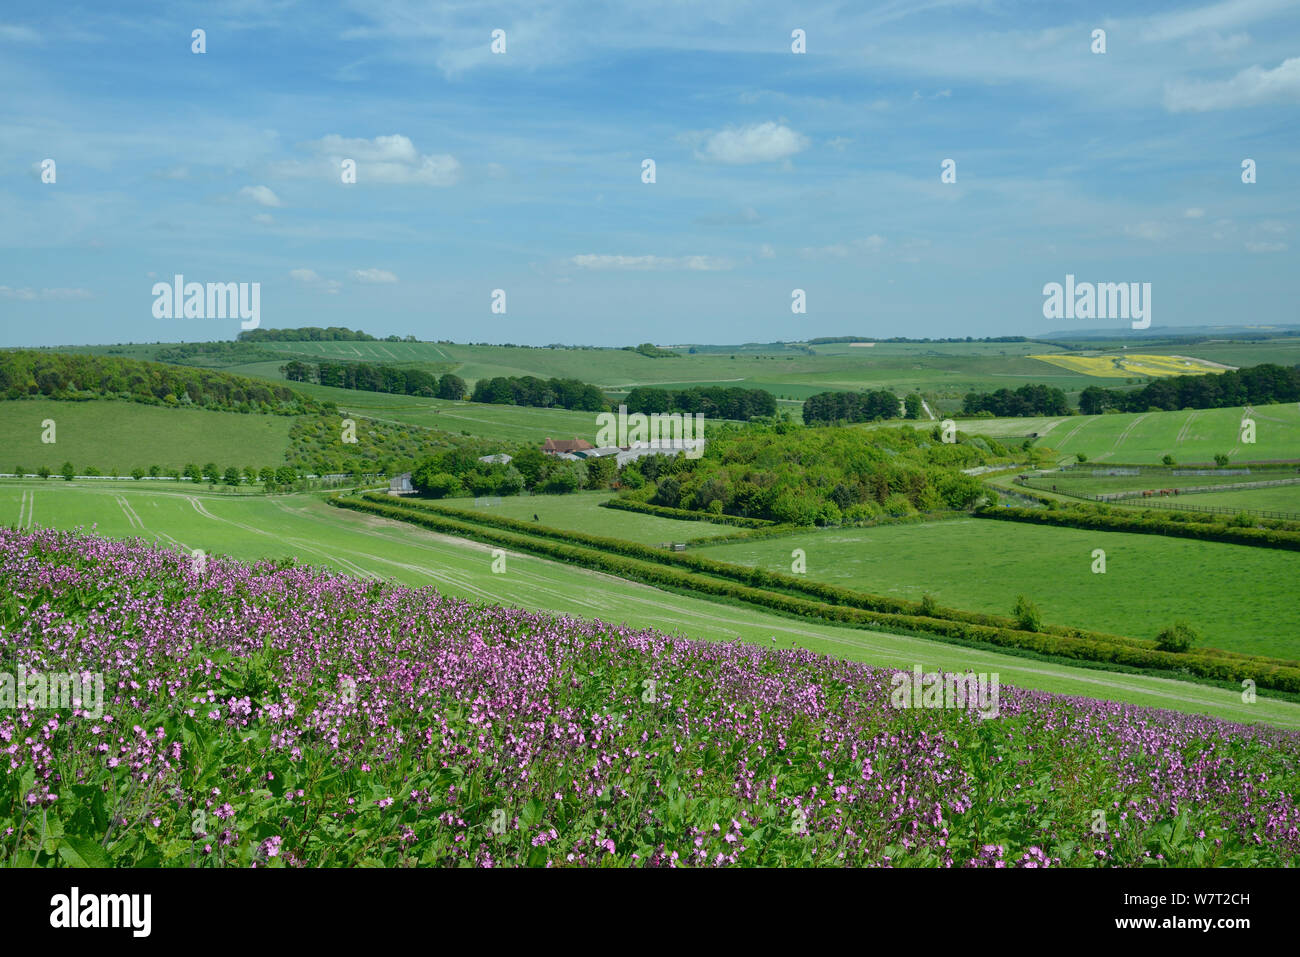 Red campion (Silene dioica) flowering in a pollen and nectar flower mix strip bordering a young Linseed crop (Linum usitatissimum), with grazing Horses (Equus caballus), farm buildings, arable crops and the Ridgeway in the background, Marlborough Downs, Wiltshire, UK, June. Stock Photo